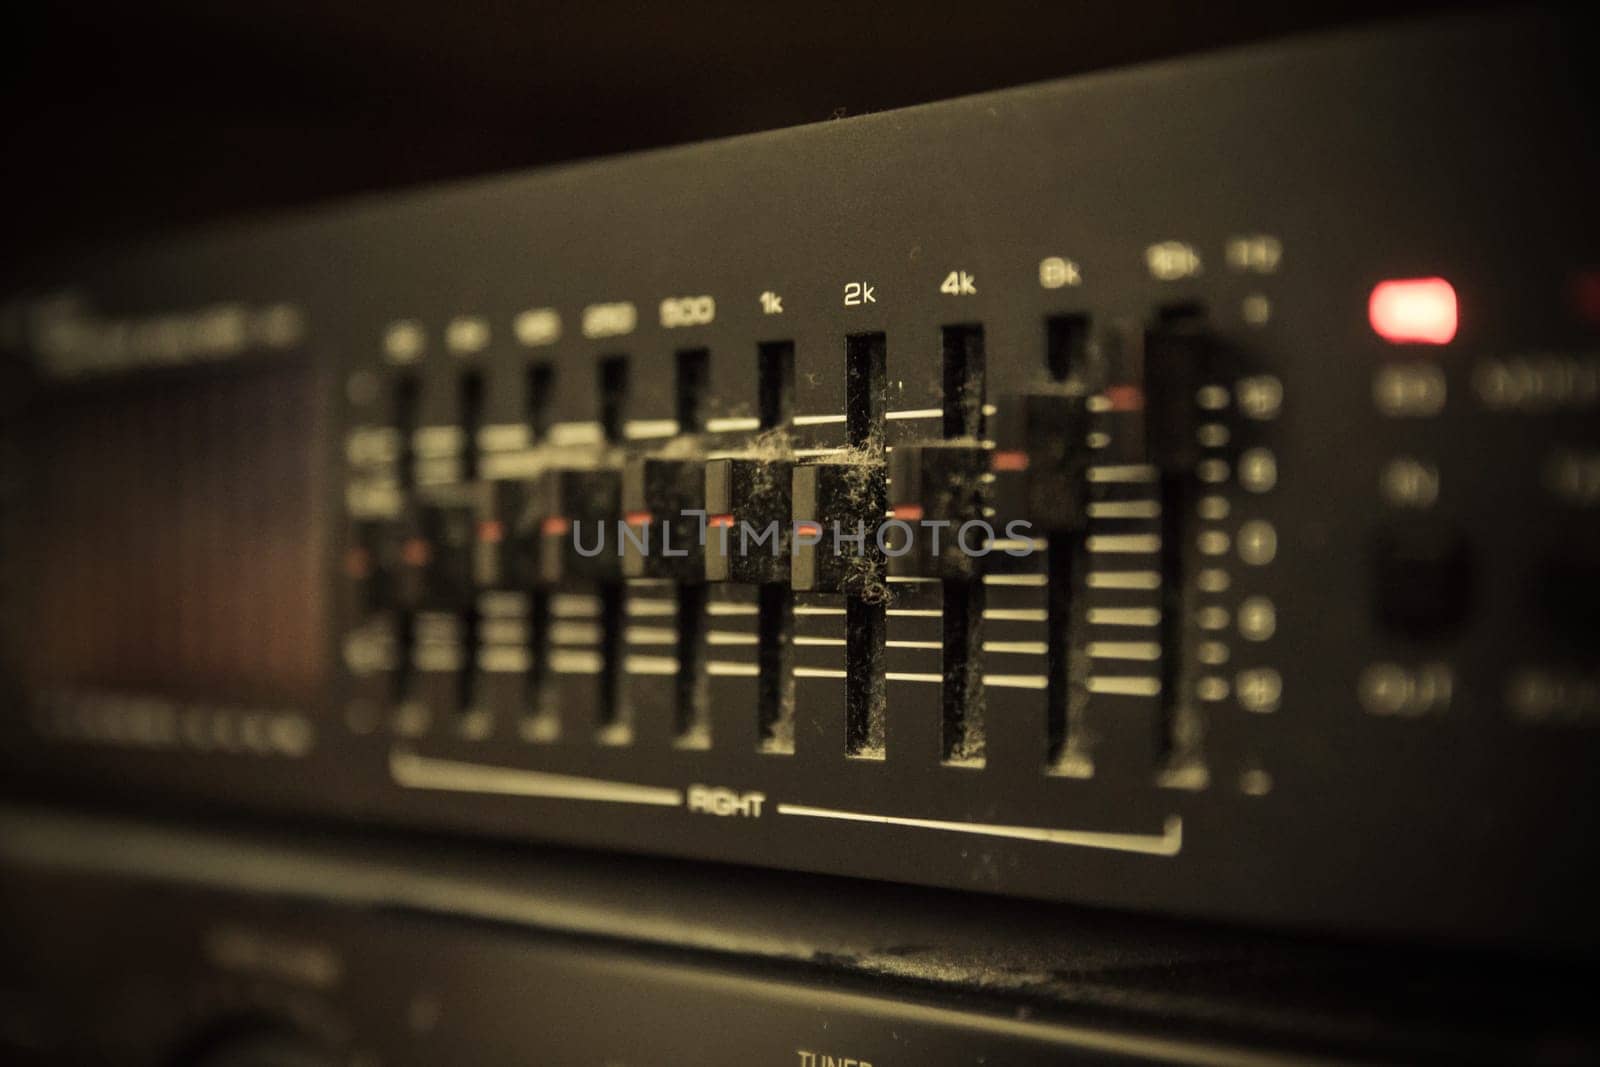 Graphic equalizer controls on an audio system - Close Up Selective Focus
